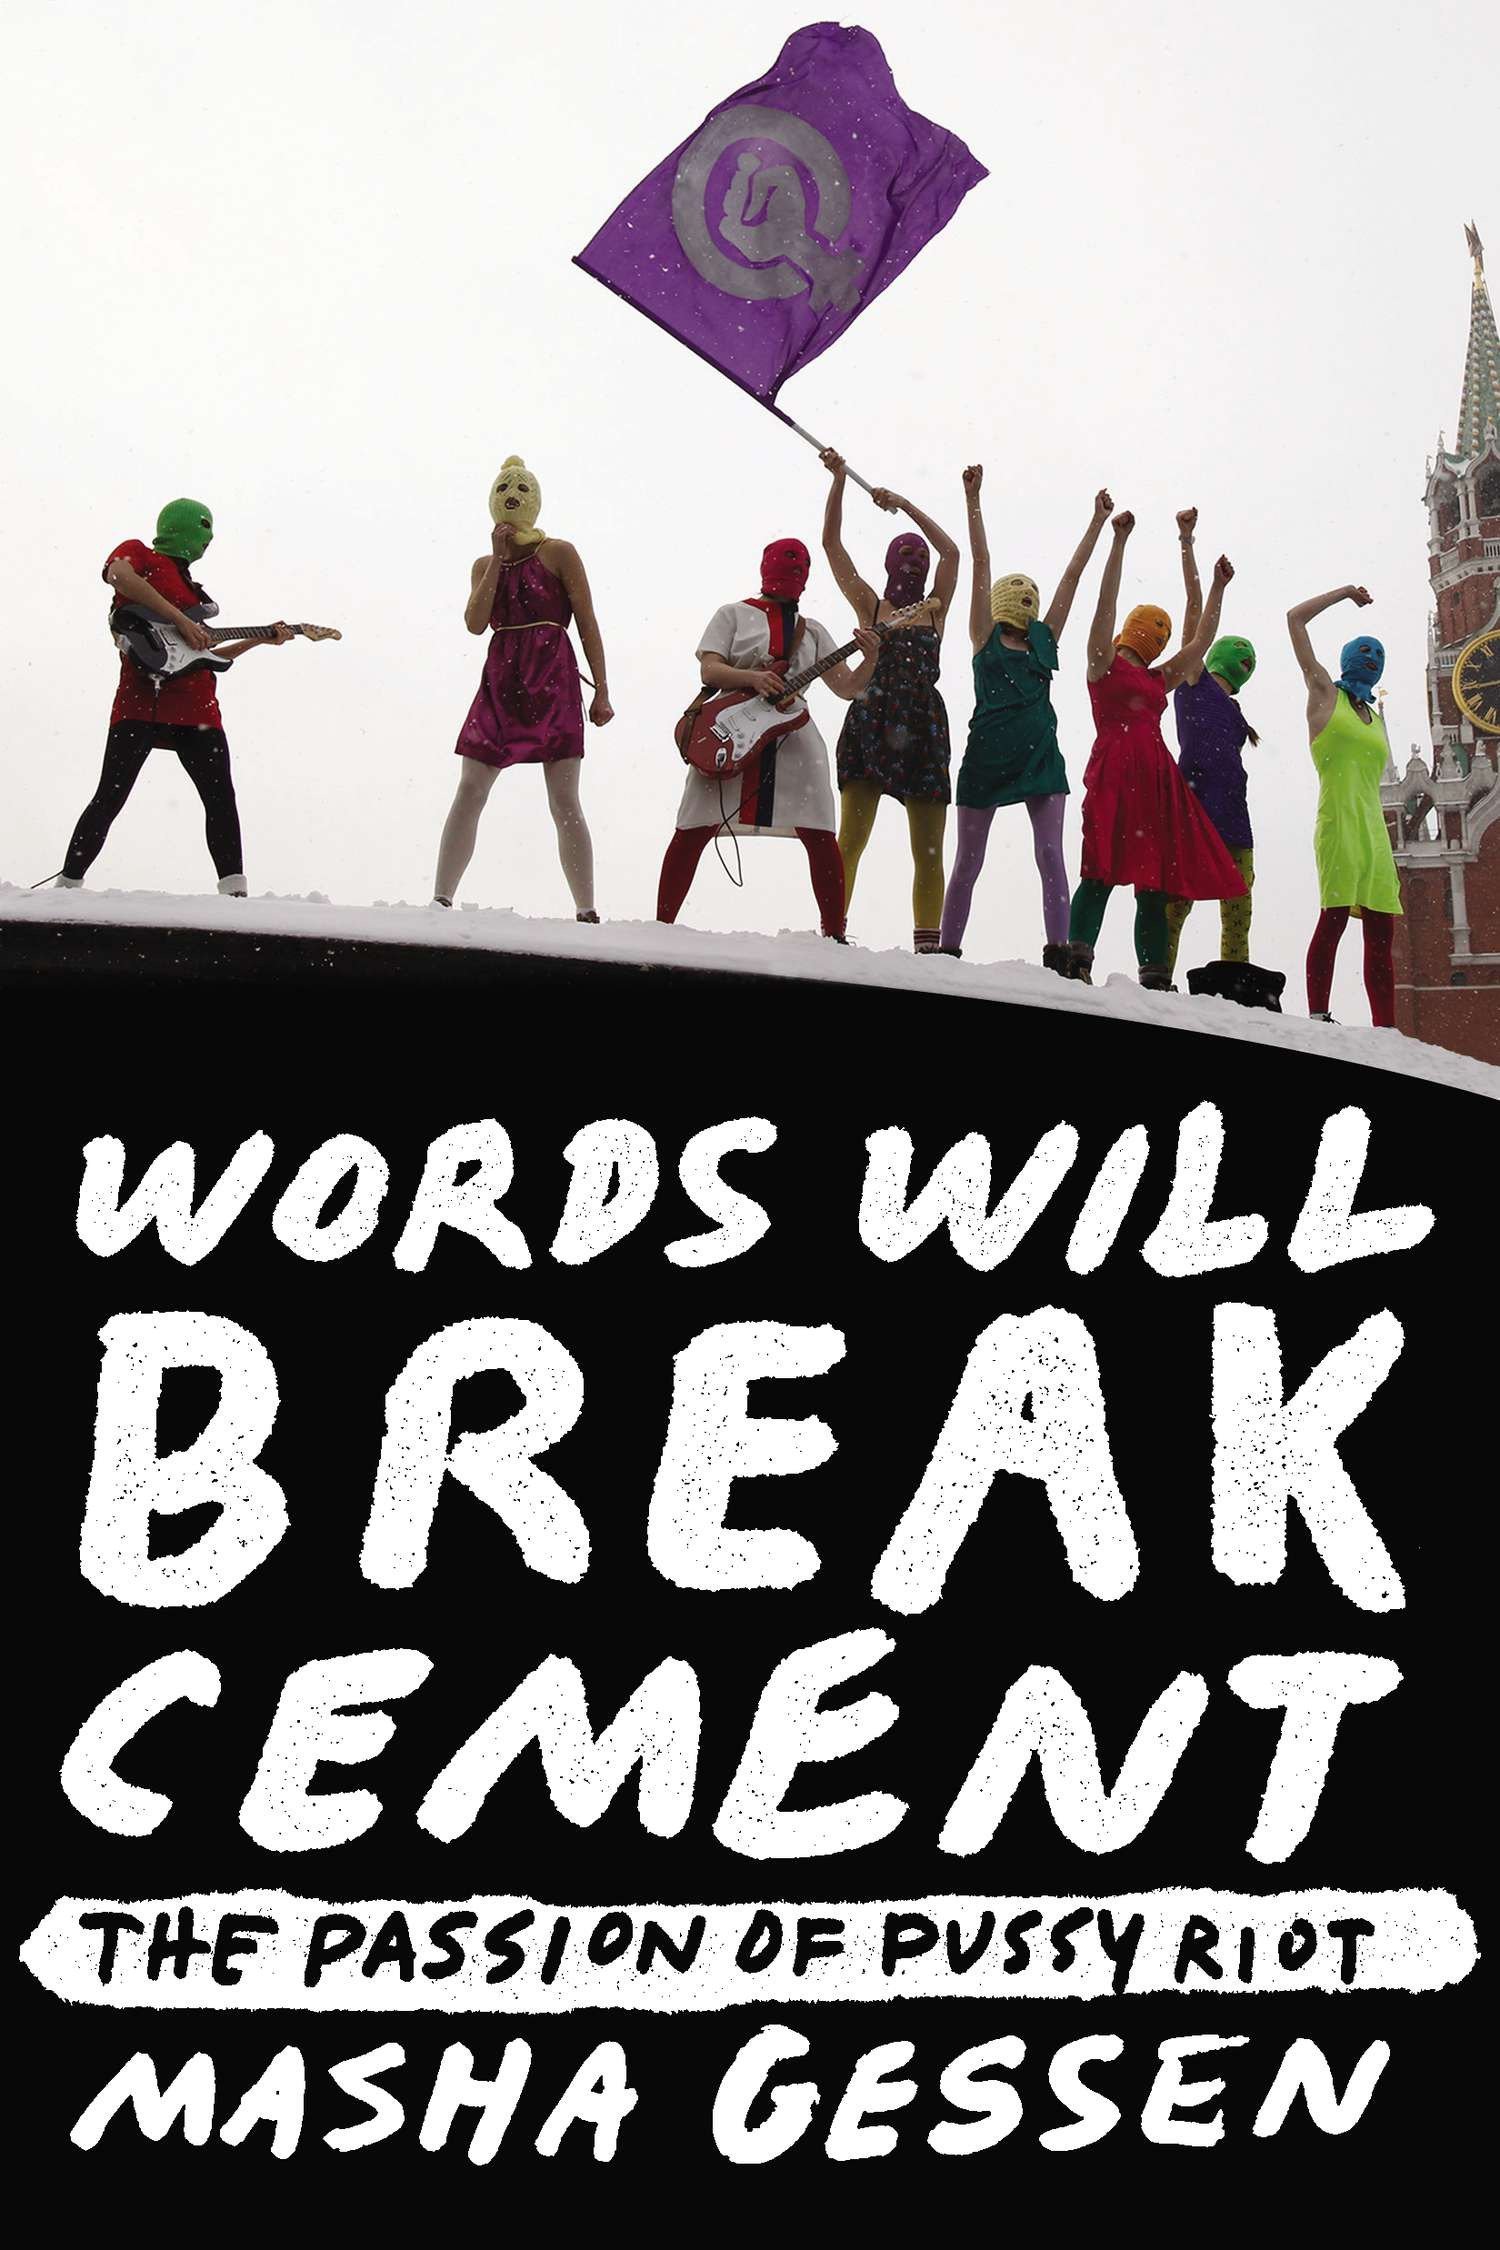 Words Will Break Cement: The Passion of Pussy Riot - listen book free online